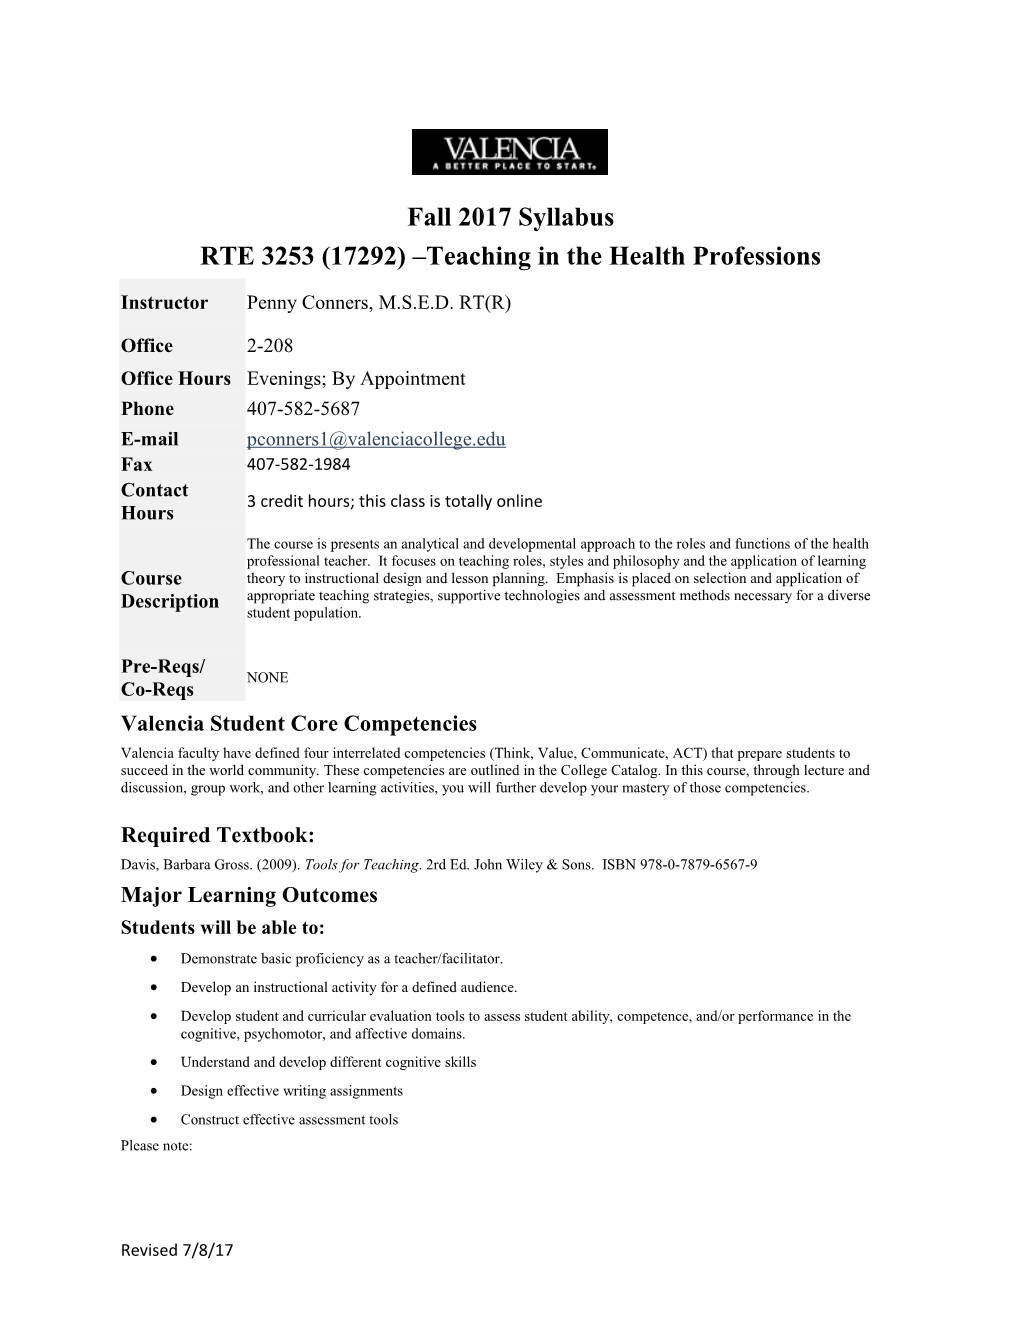 RTE 3253 (17292) Teaching in the Health Professions